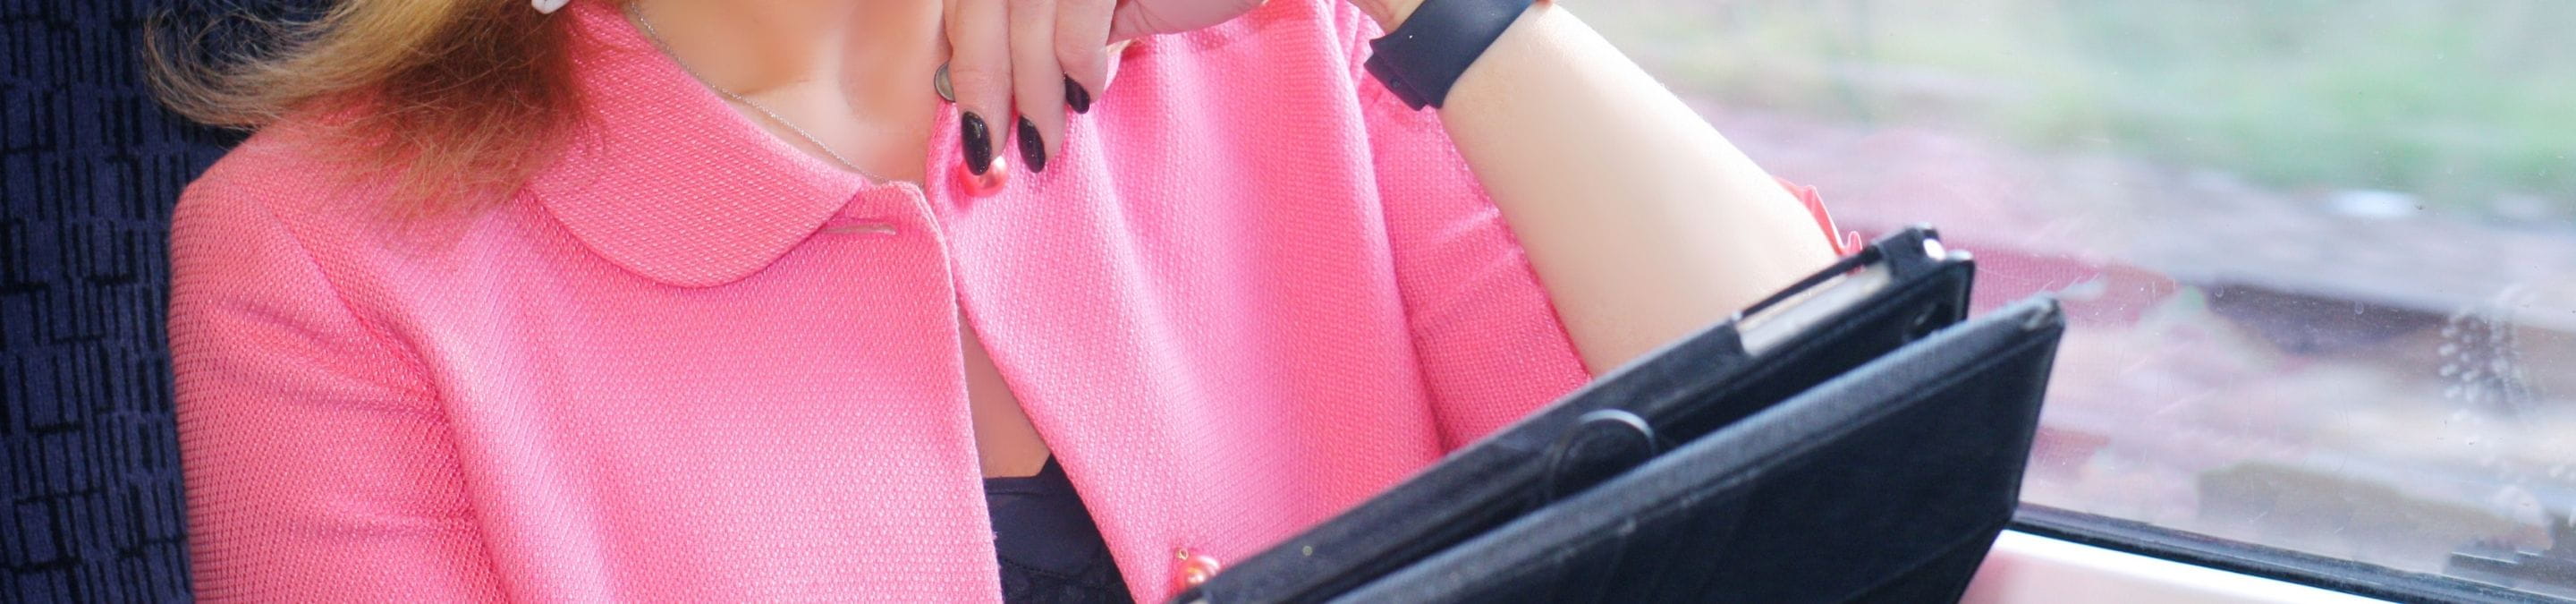 a close up of a person holding a piece of luggage